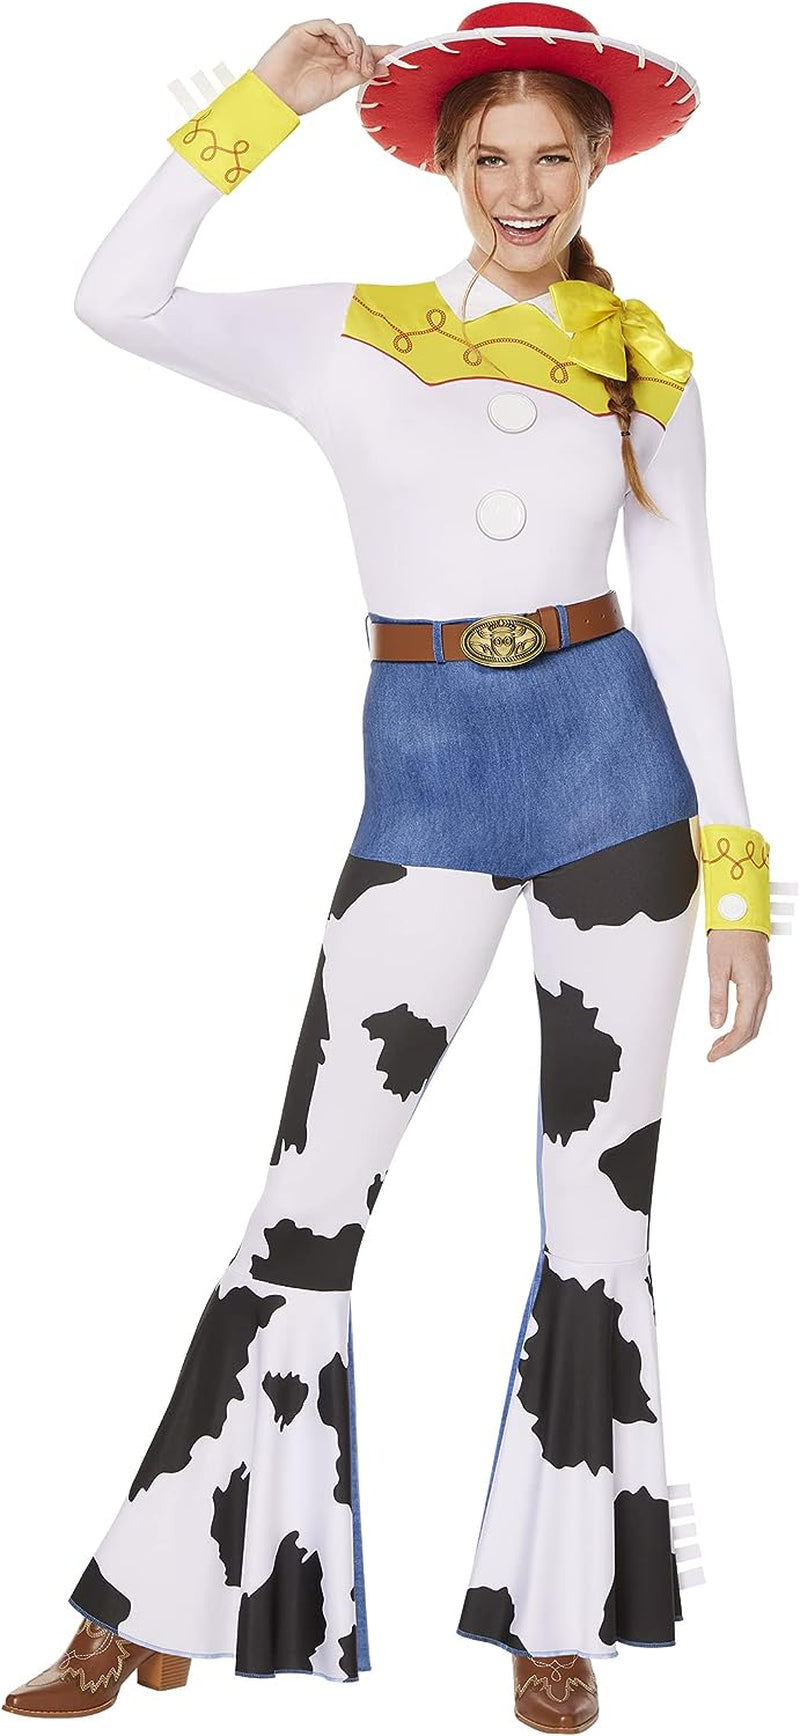 Spirit Halloween Toy Story Adult Jessie Costume | Officially Licensed | Group Costume | Pixar | Cowgirl Cosplay